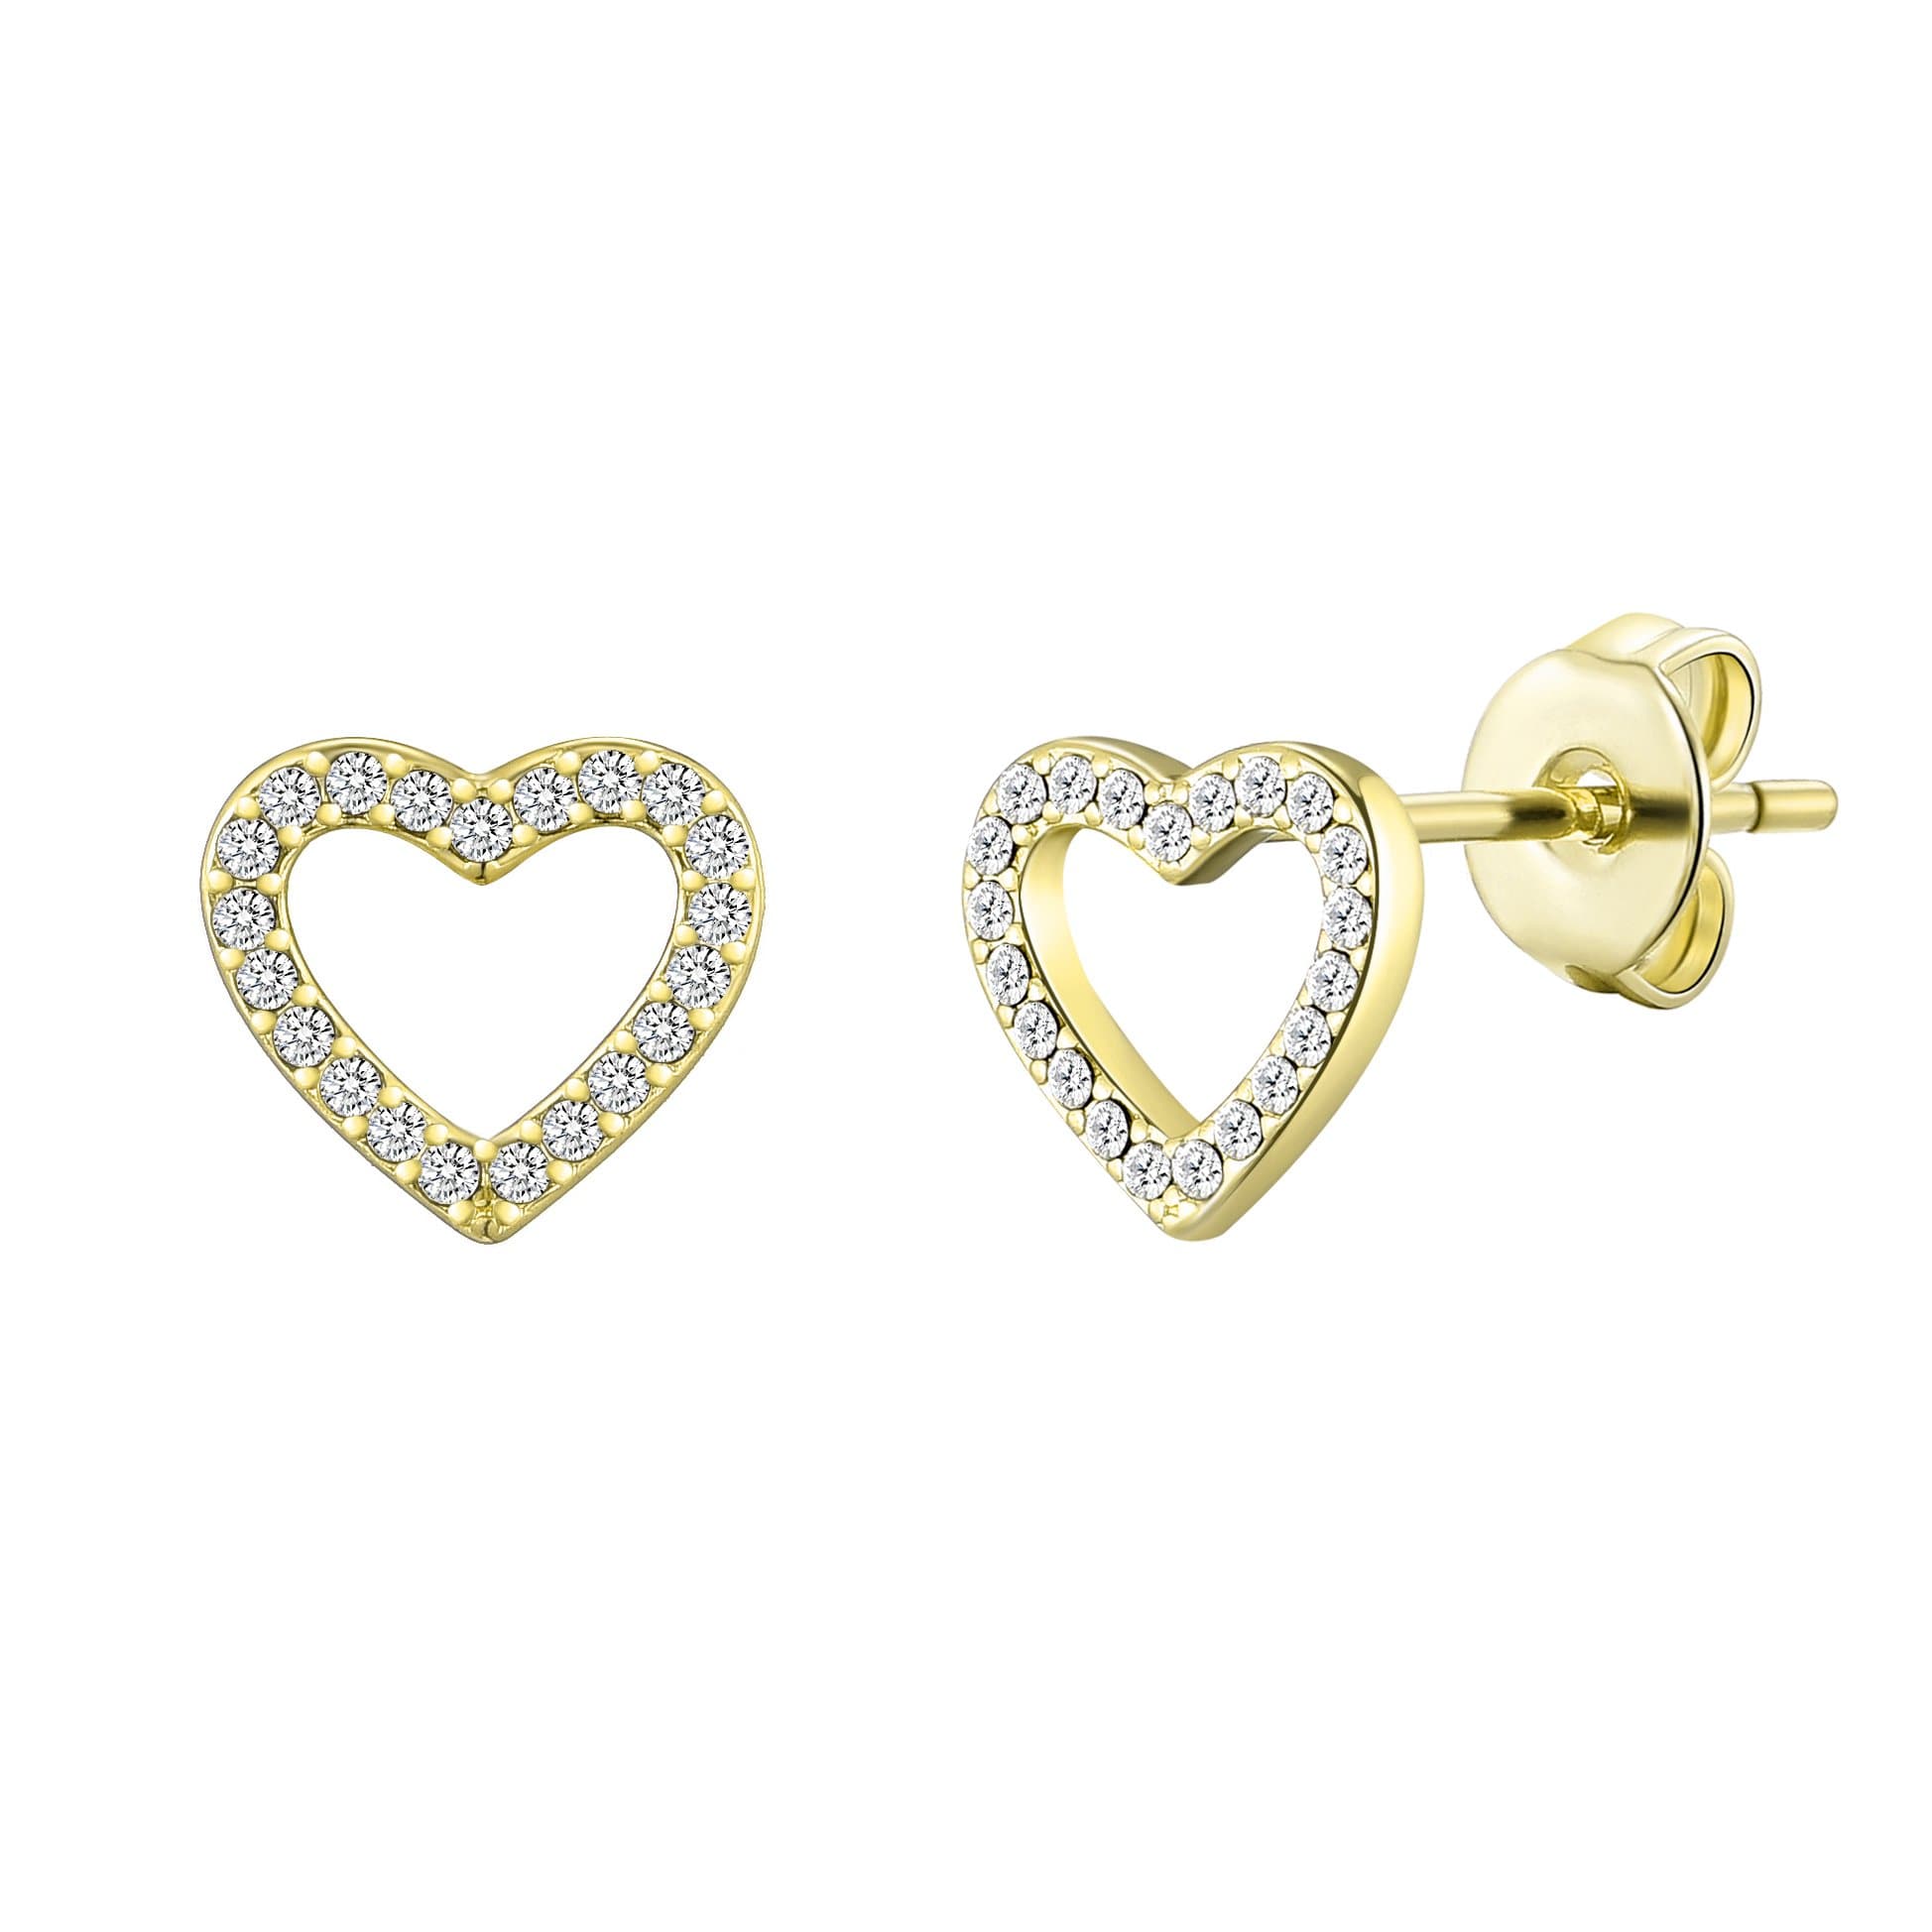 Gold Plated Open Heart Earrings Created with Zircondia® Crystals by Philip Jones Jewellery